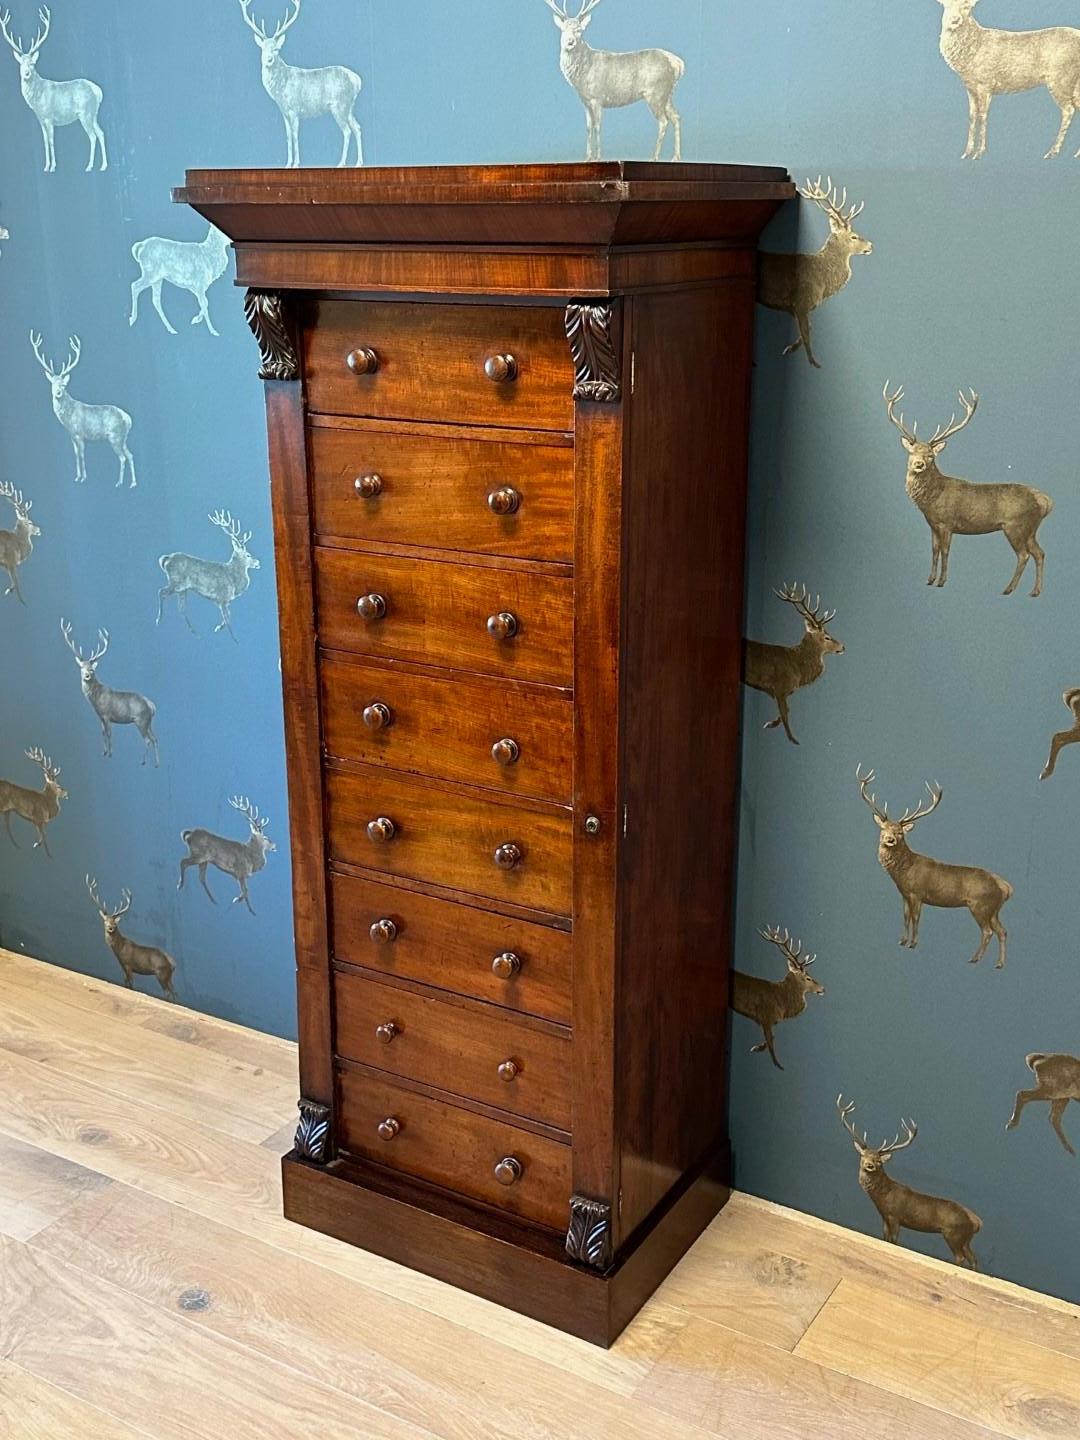 Impressive antique mahogany Wellington chest of drawers with 8 drawers. With the characteristic closure on the right side. No key present. In beautiful original condition. ready for daily use

Origin: England
Wood type: Mahogany
Period: Approx.